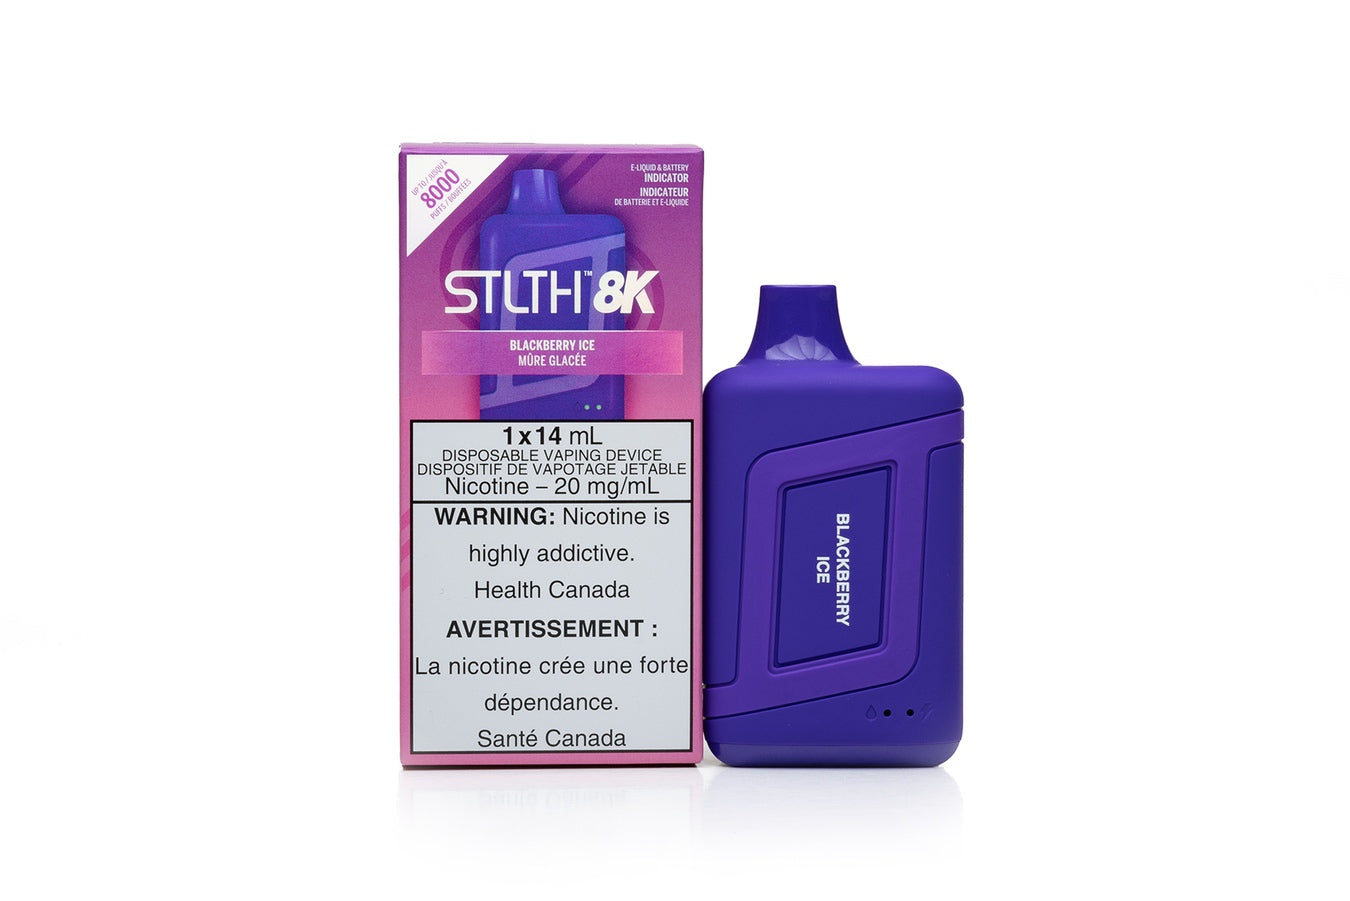 STLTH 8K next to packaging